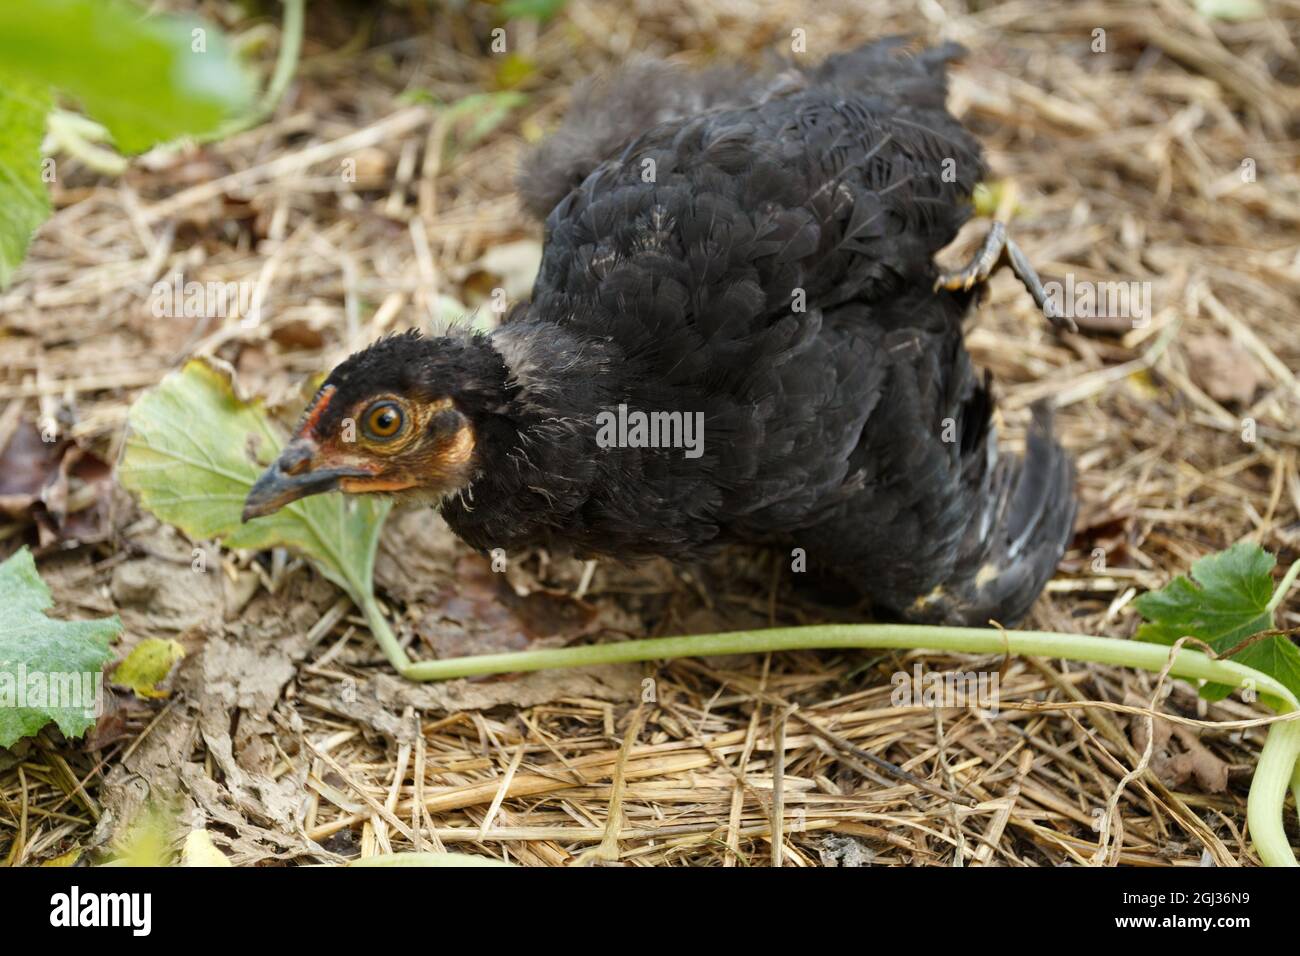 Black chick in the garden, close-up Stock Photo